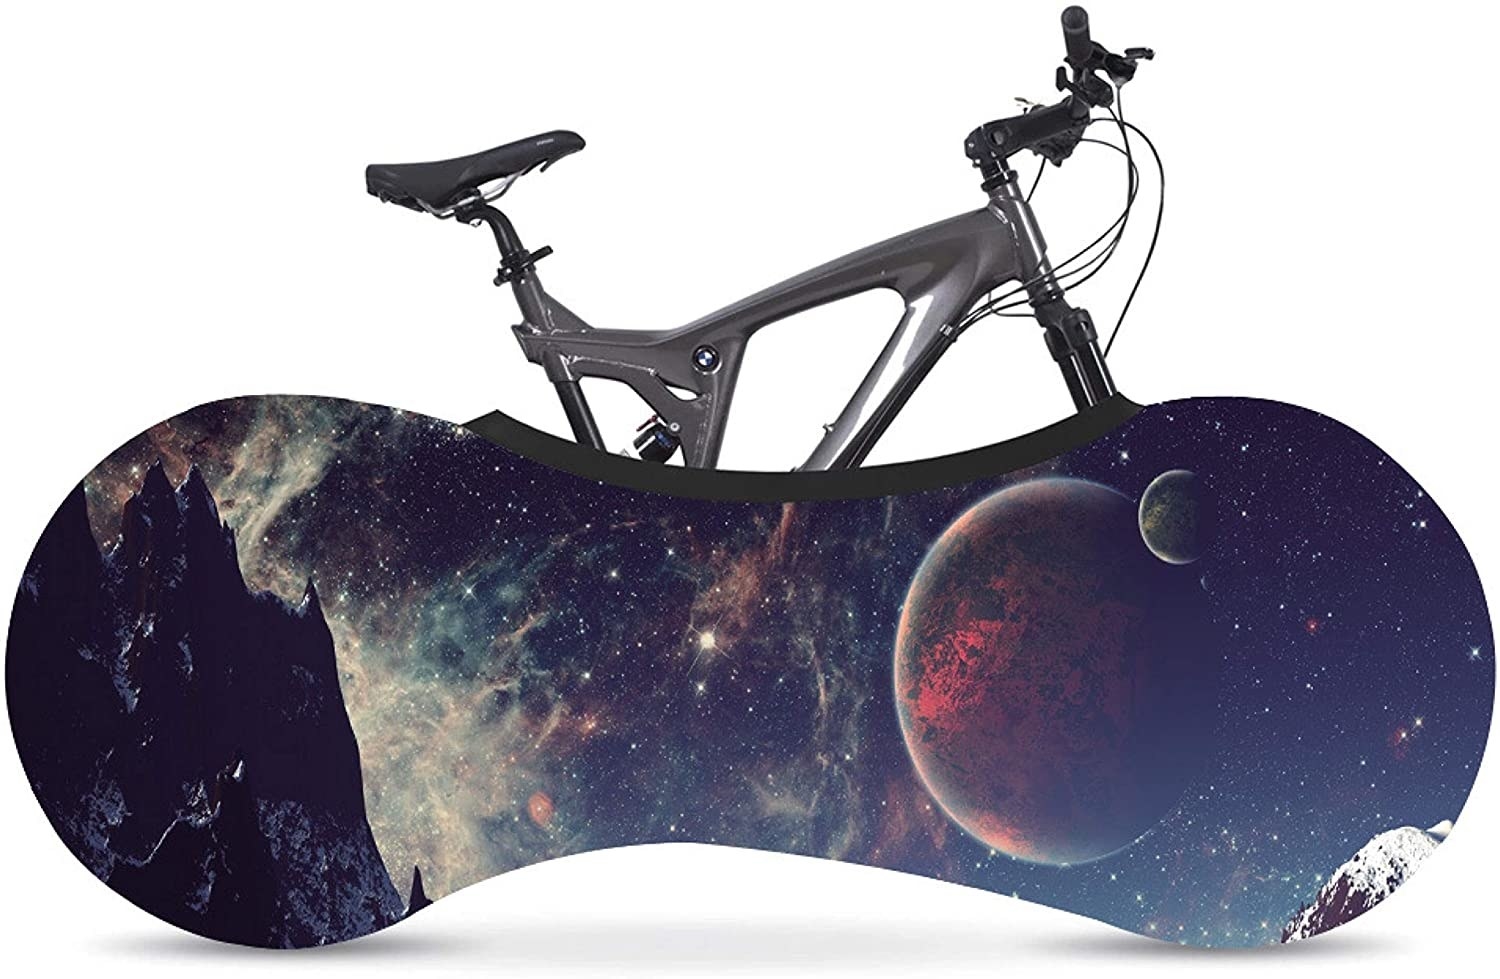 a bike wheel cover printed with a galactic design